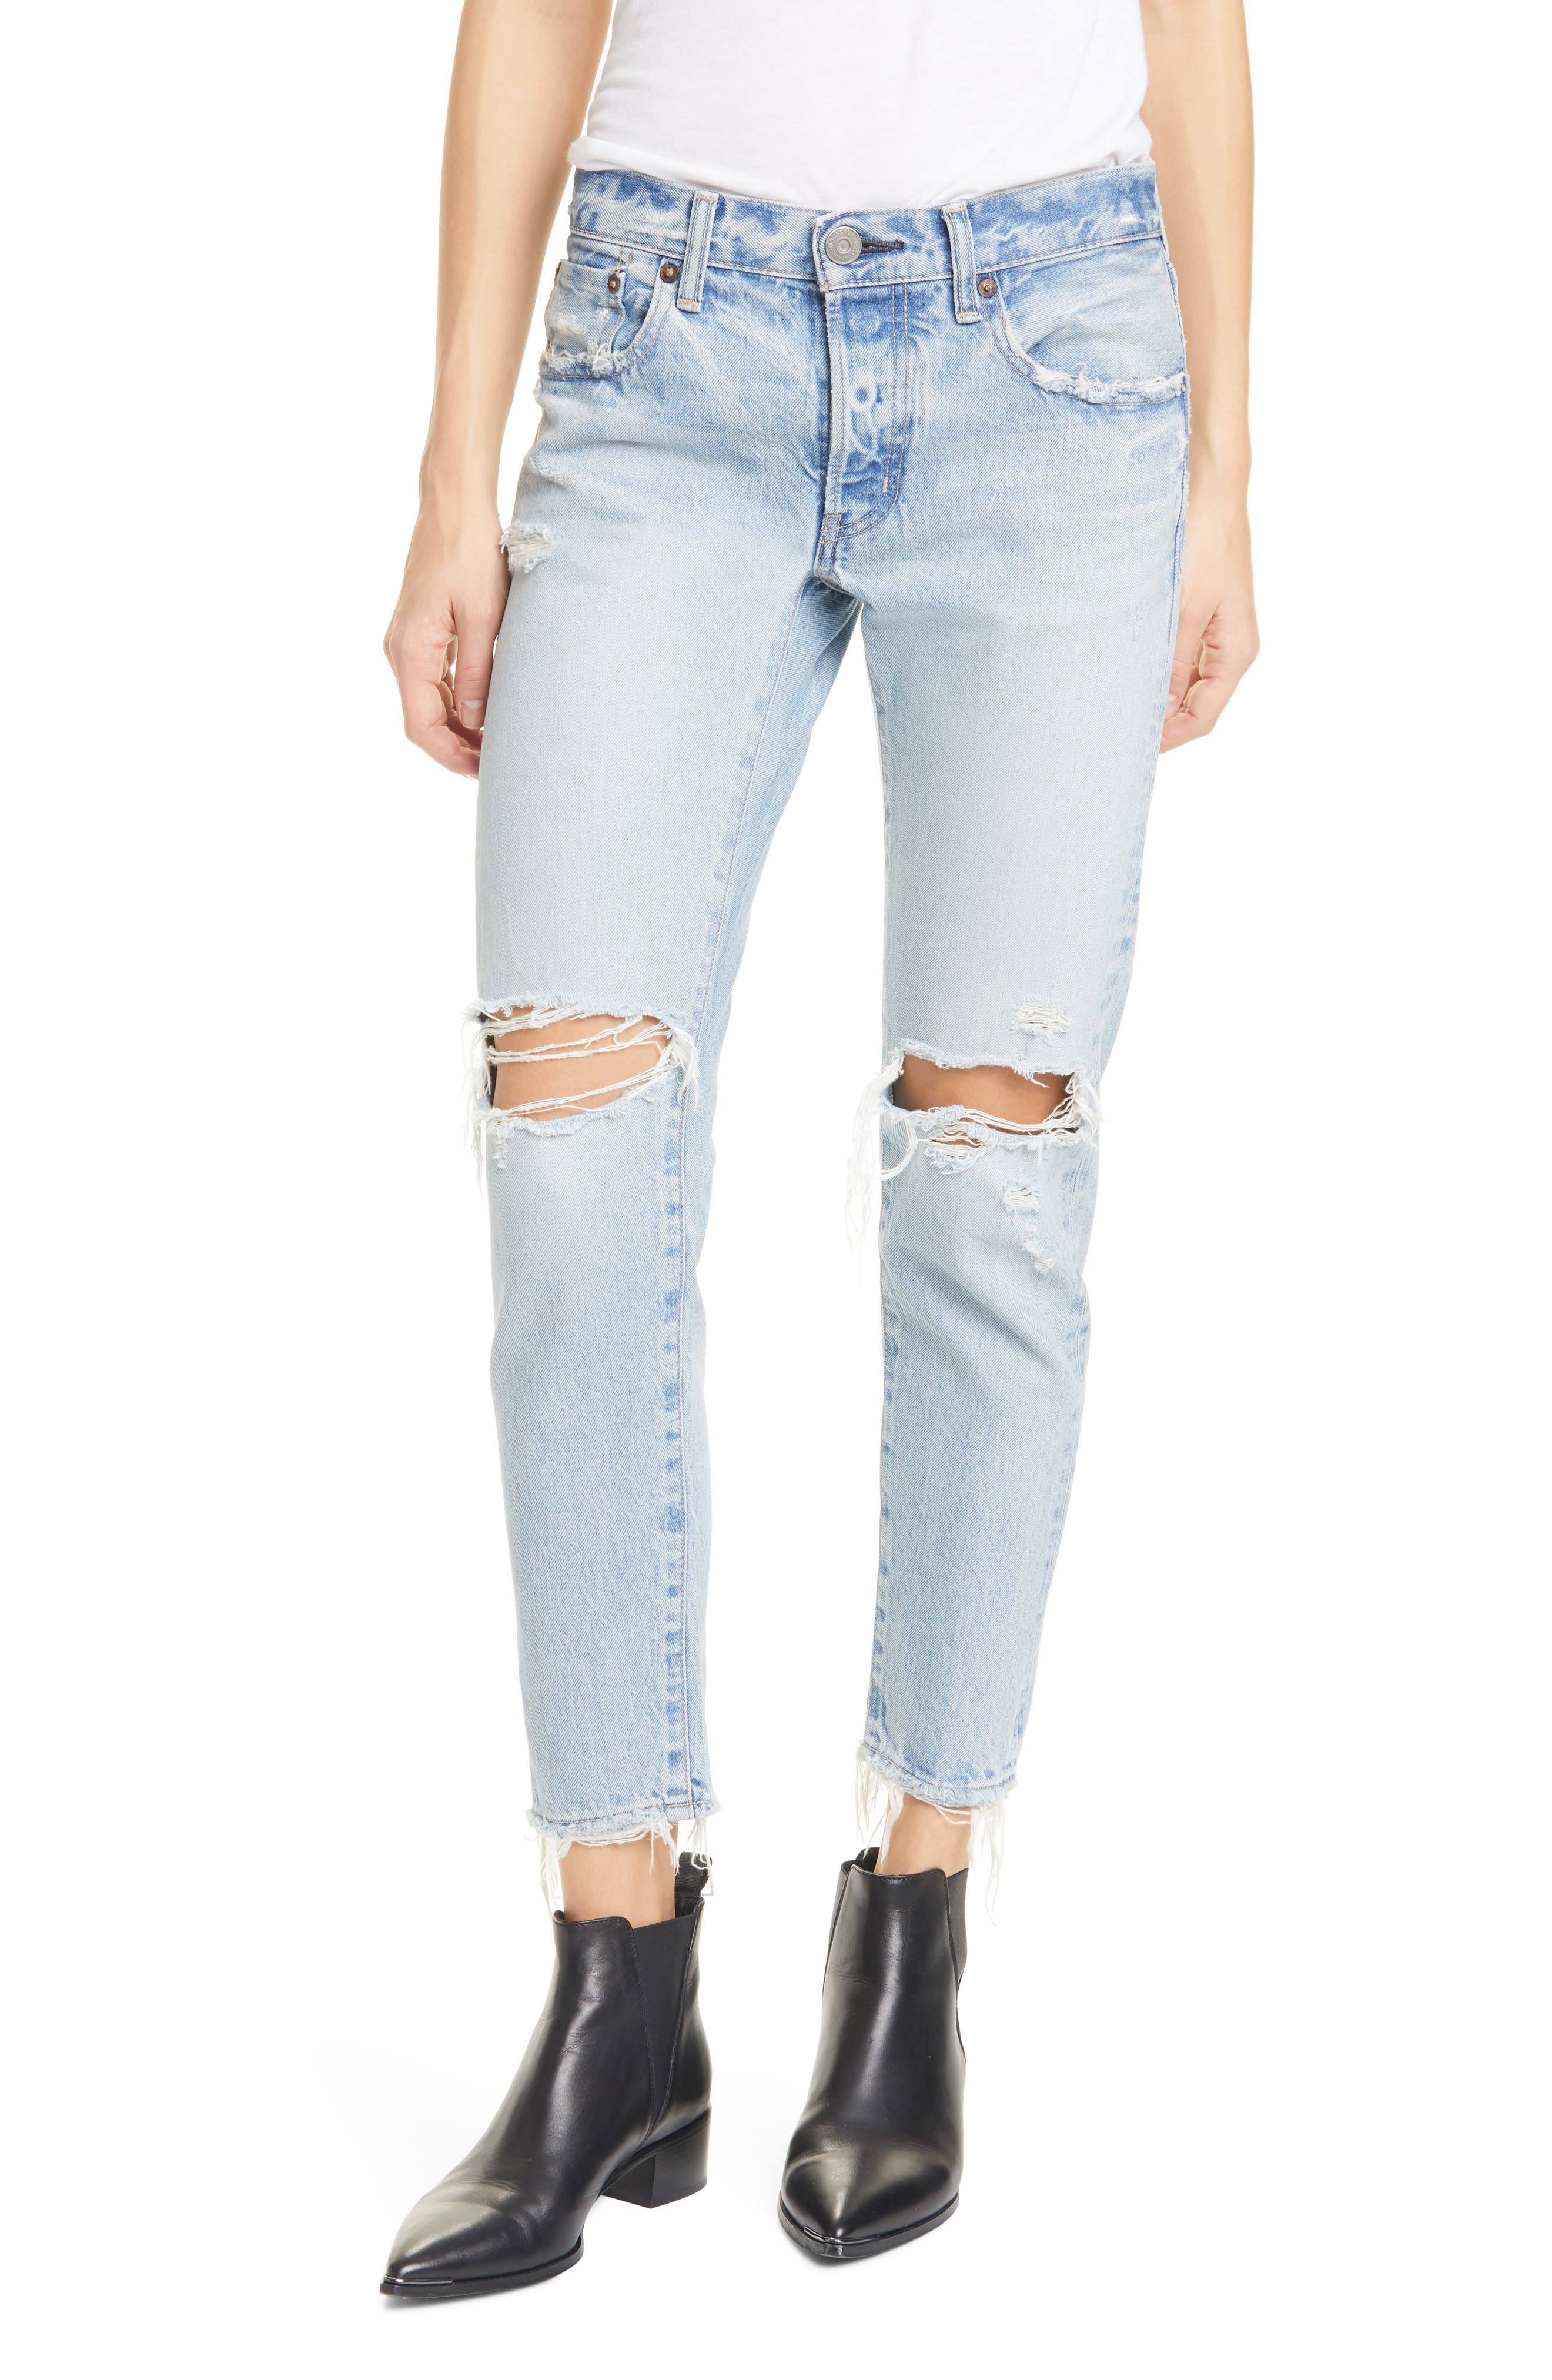 jeans that fit athletic thighs